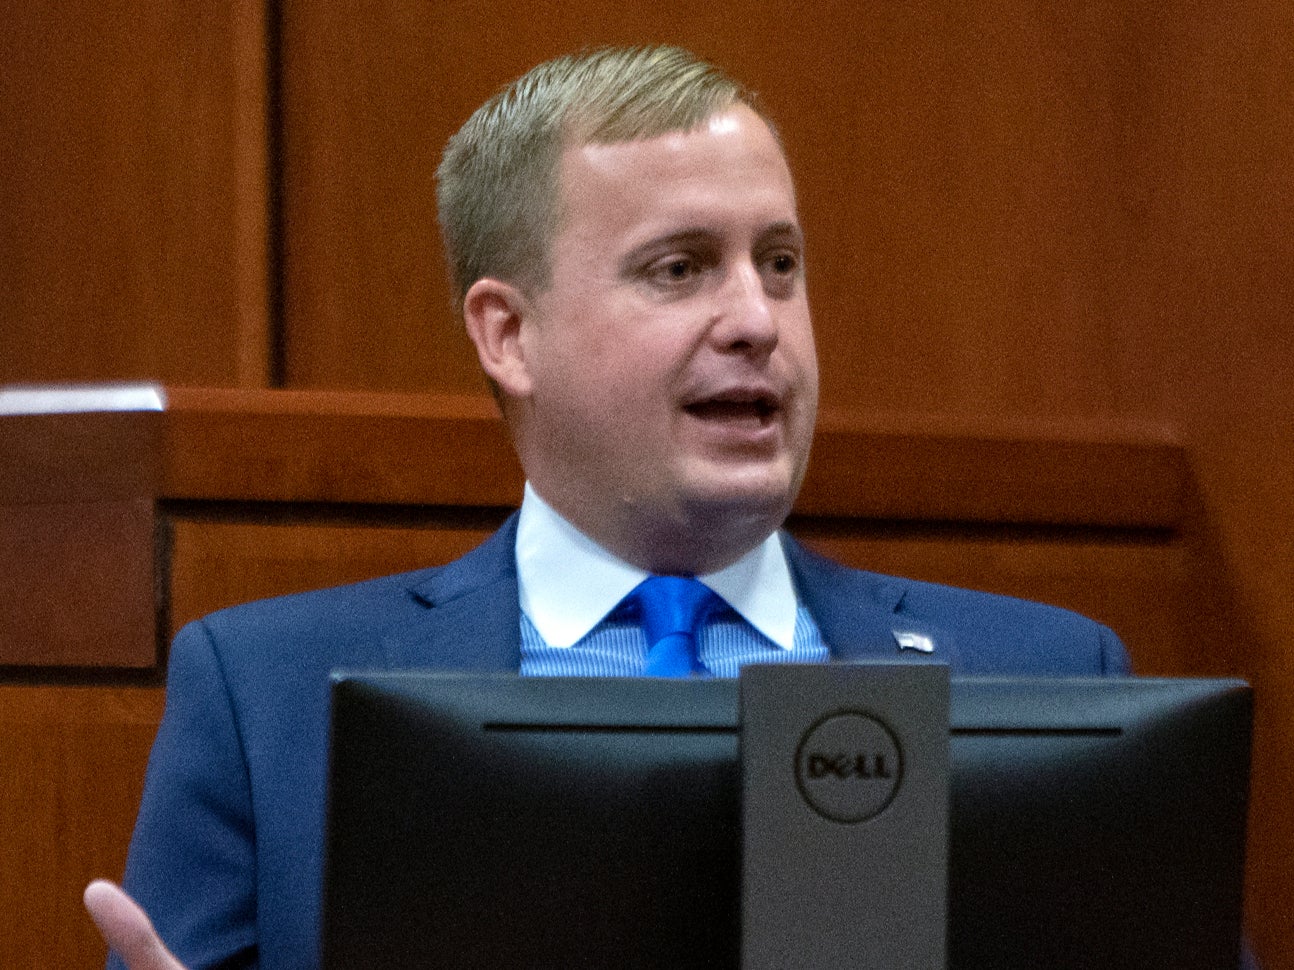 Former Idaho state Rep. Aaron von Ehlinger testifies on his own behalf during day three of his rape trial at the Ada County Courthouse, Thursday, April 28, 2022, in Boise, Idaho